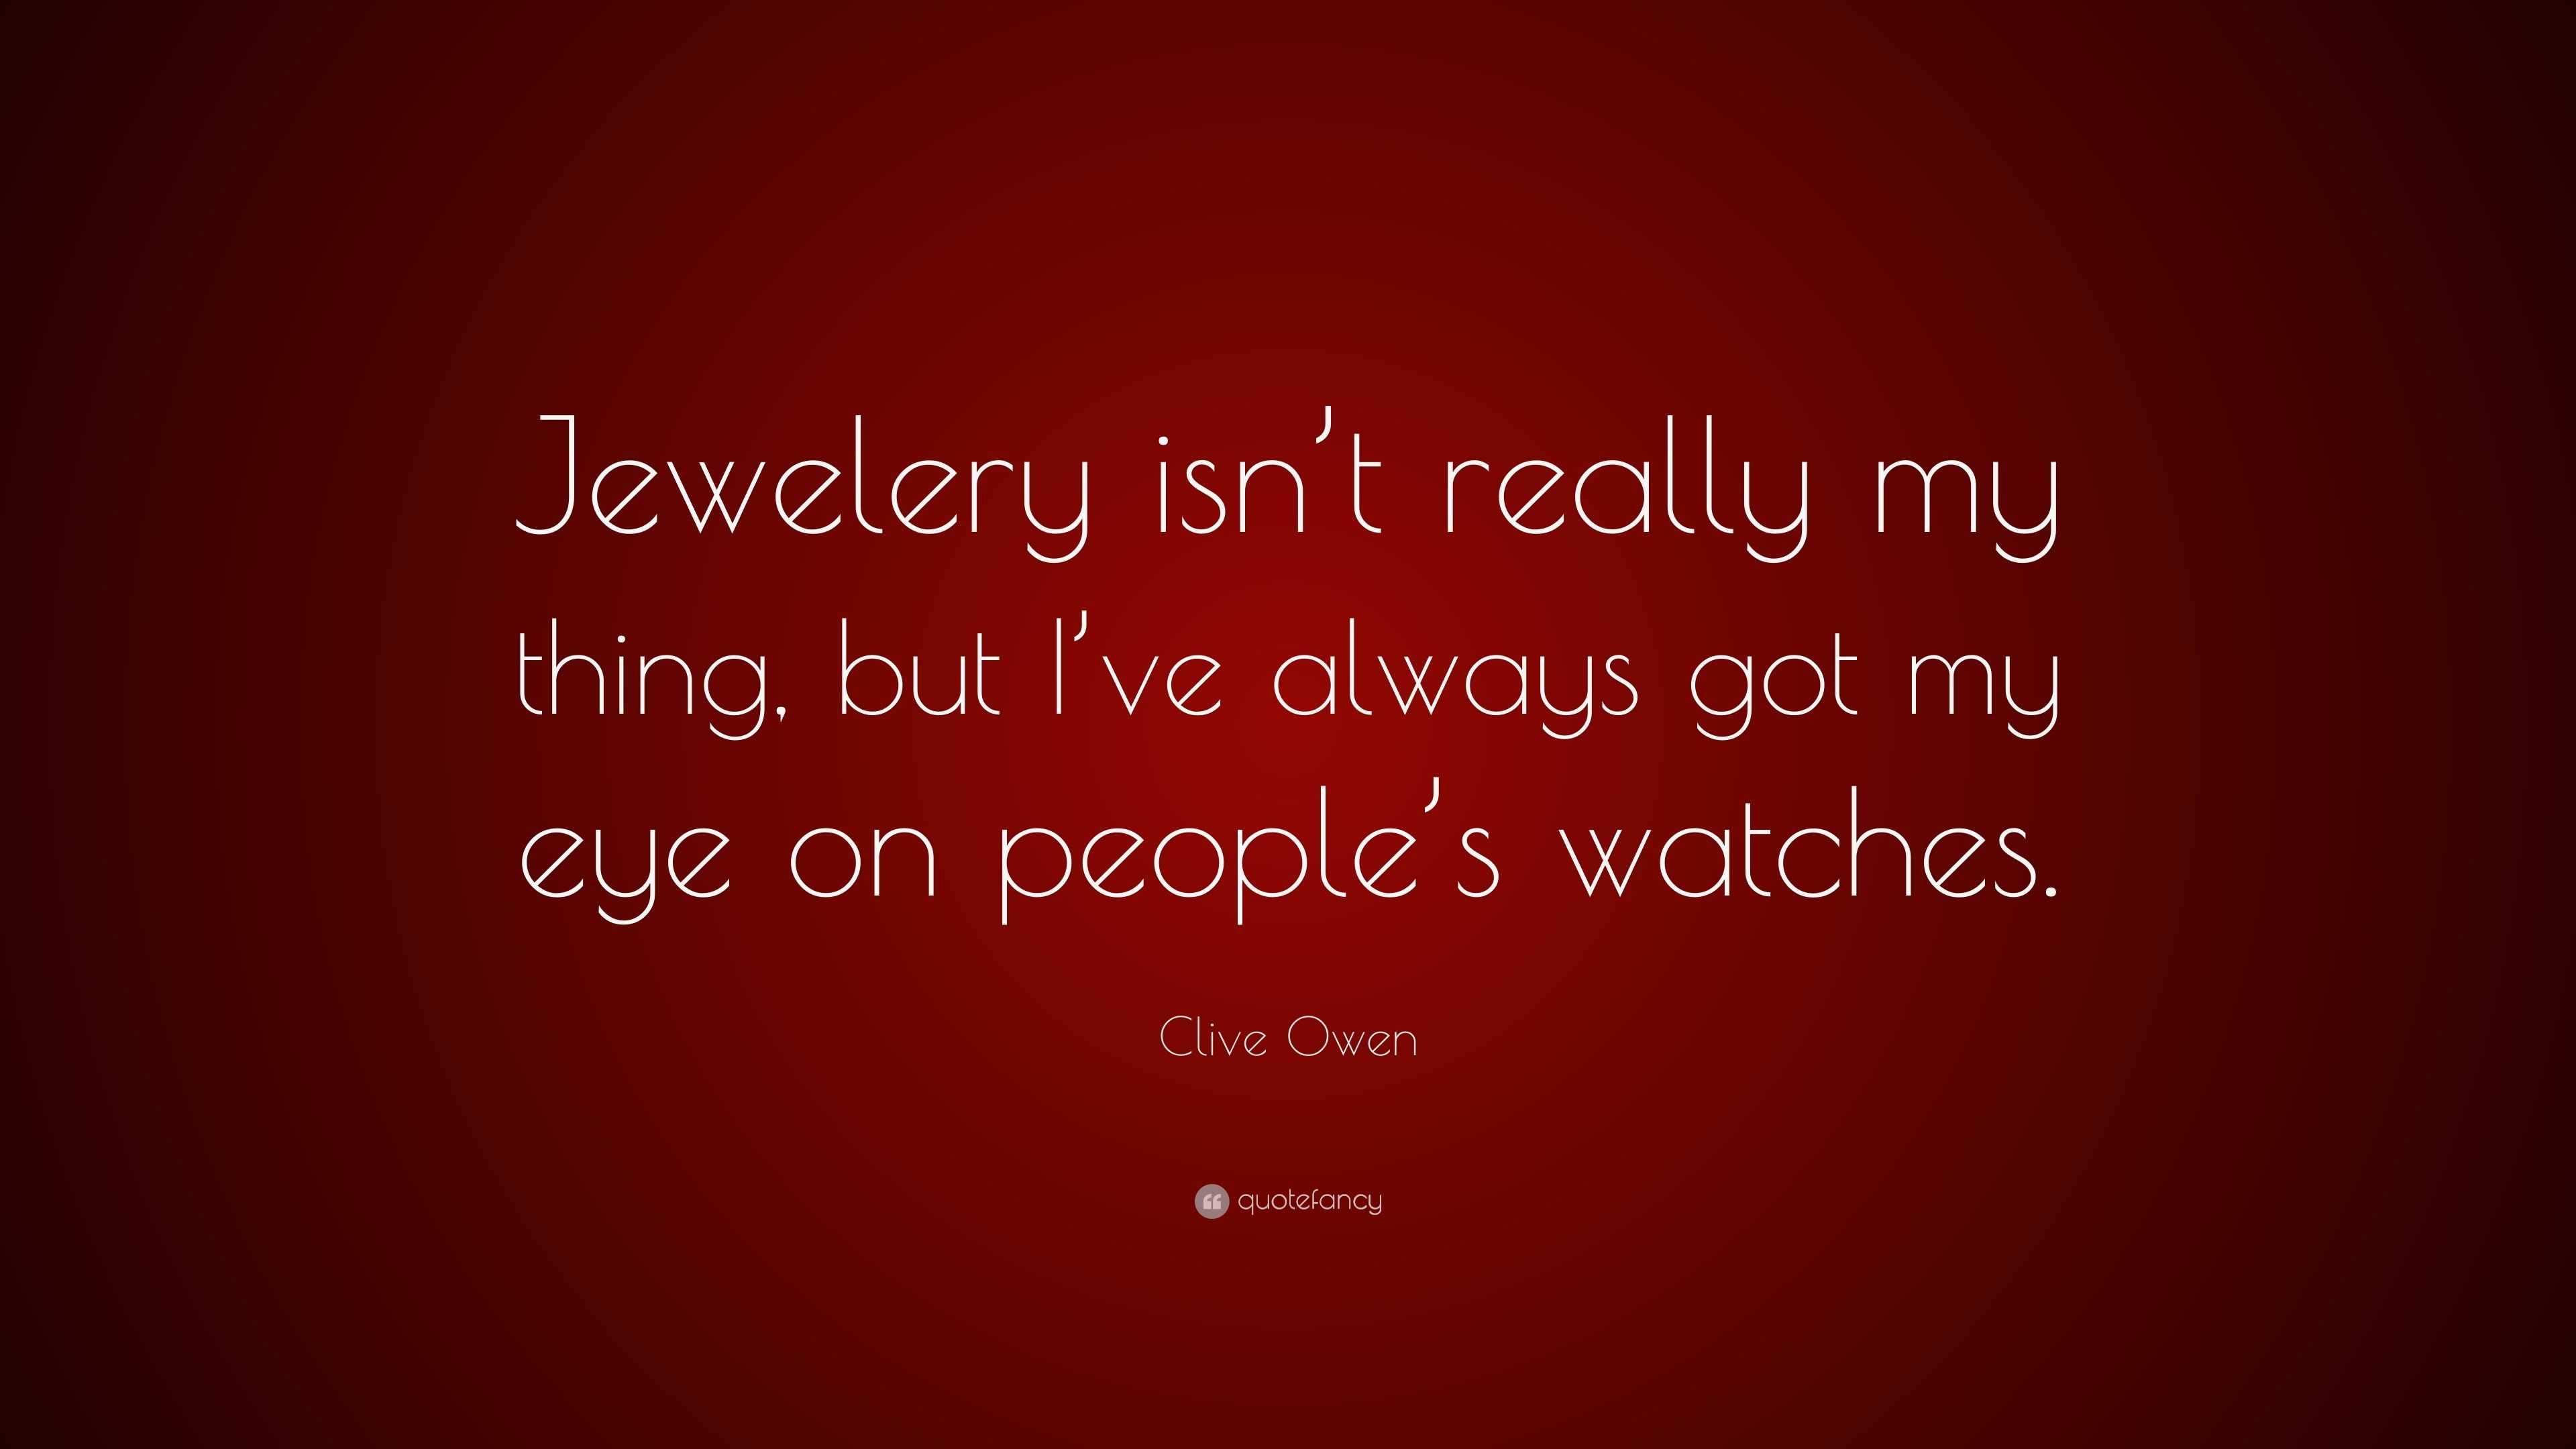 3910822 Clive Owen Quote Jewelery isn t really my thing but I ve always